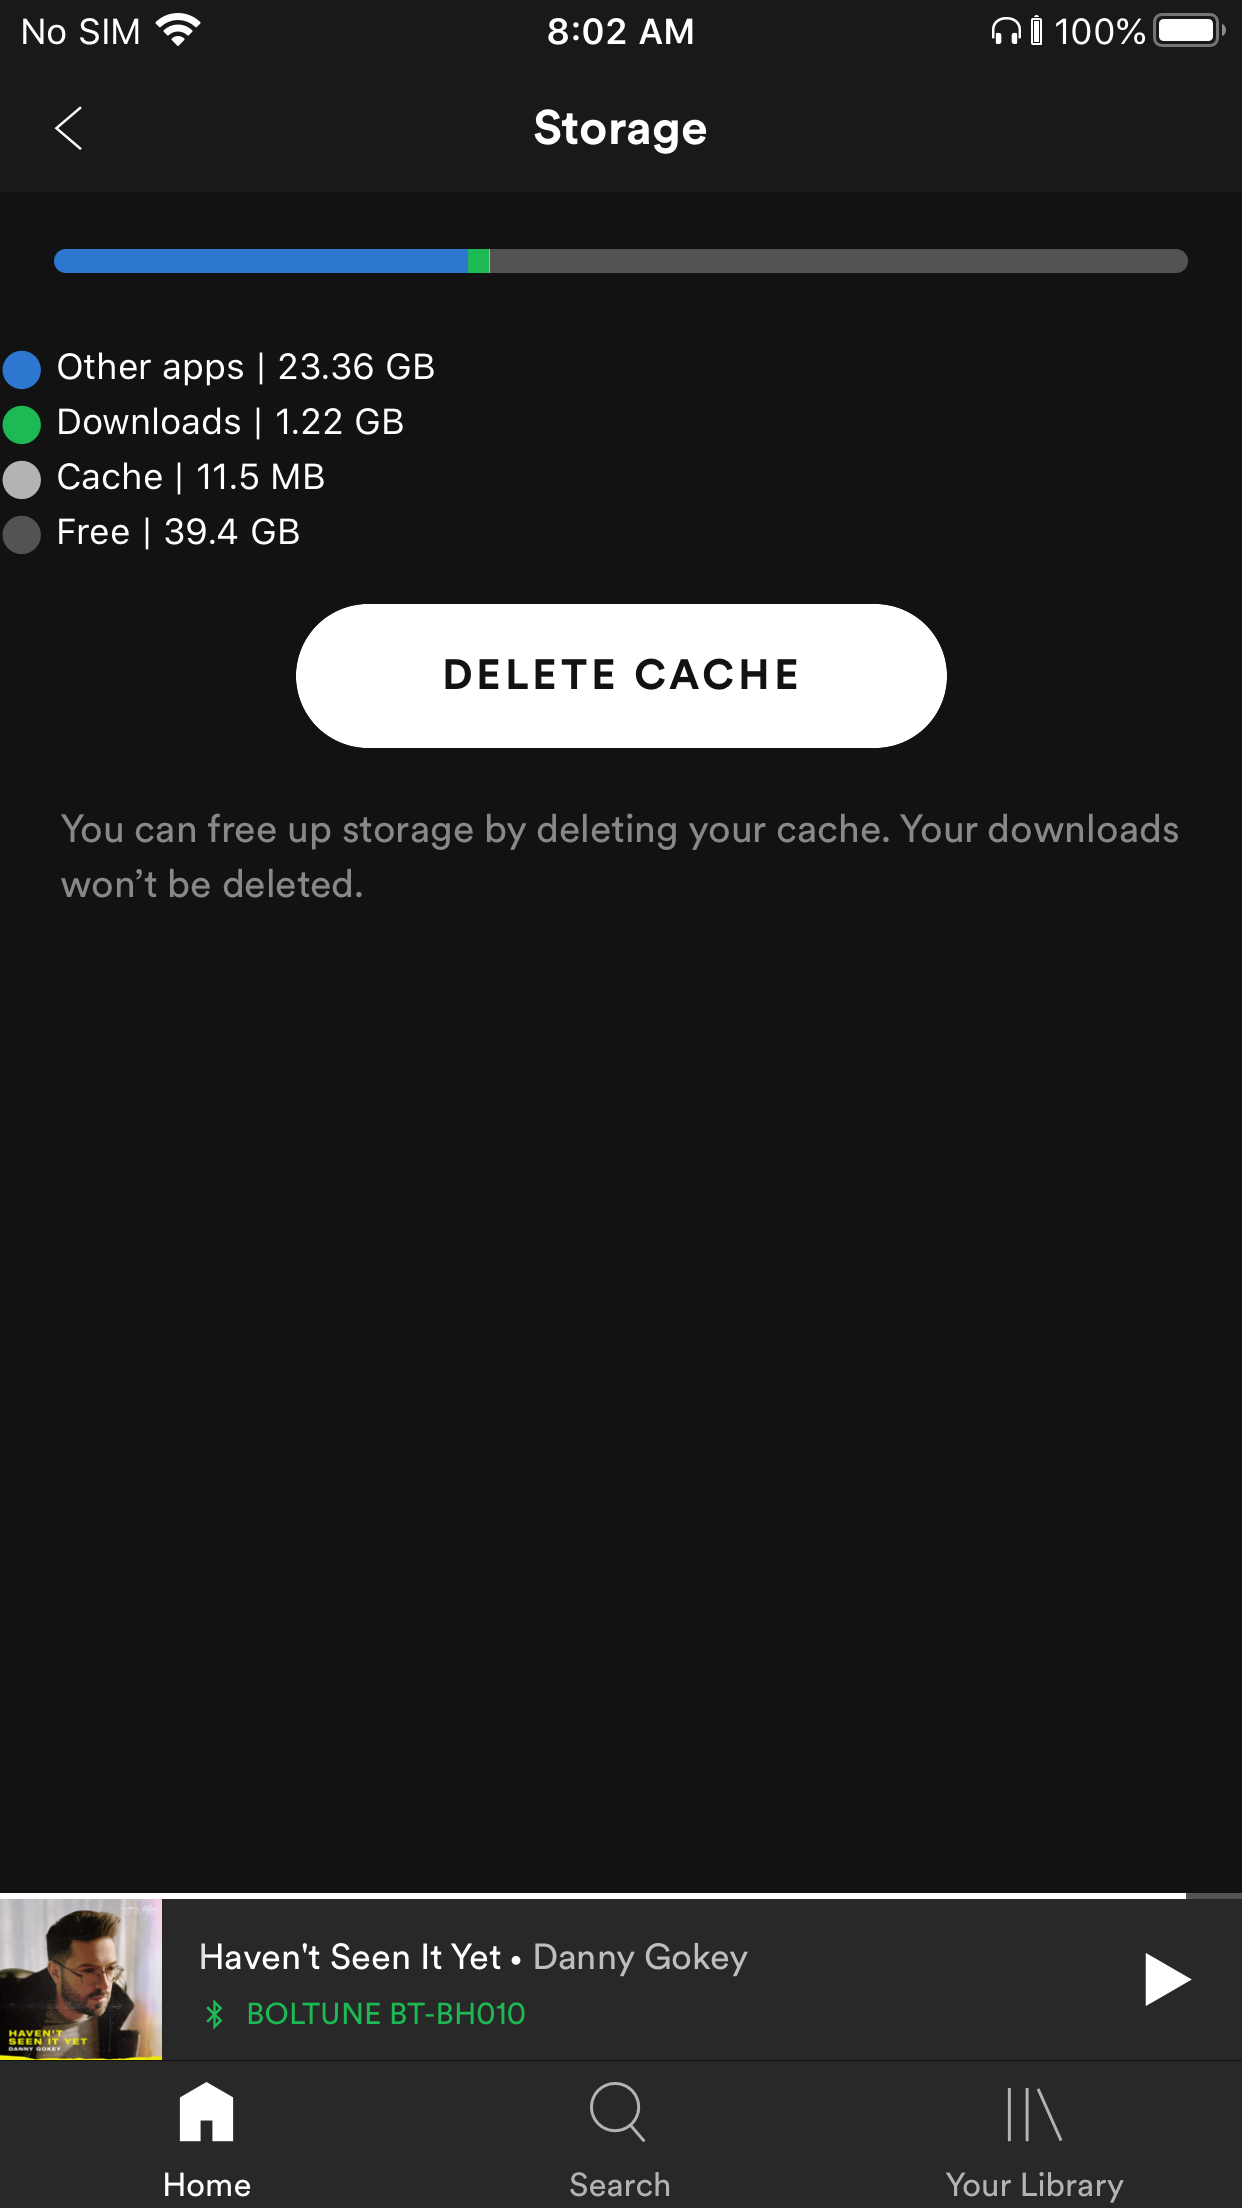 sync spotify local files on phone without download